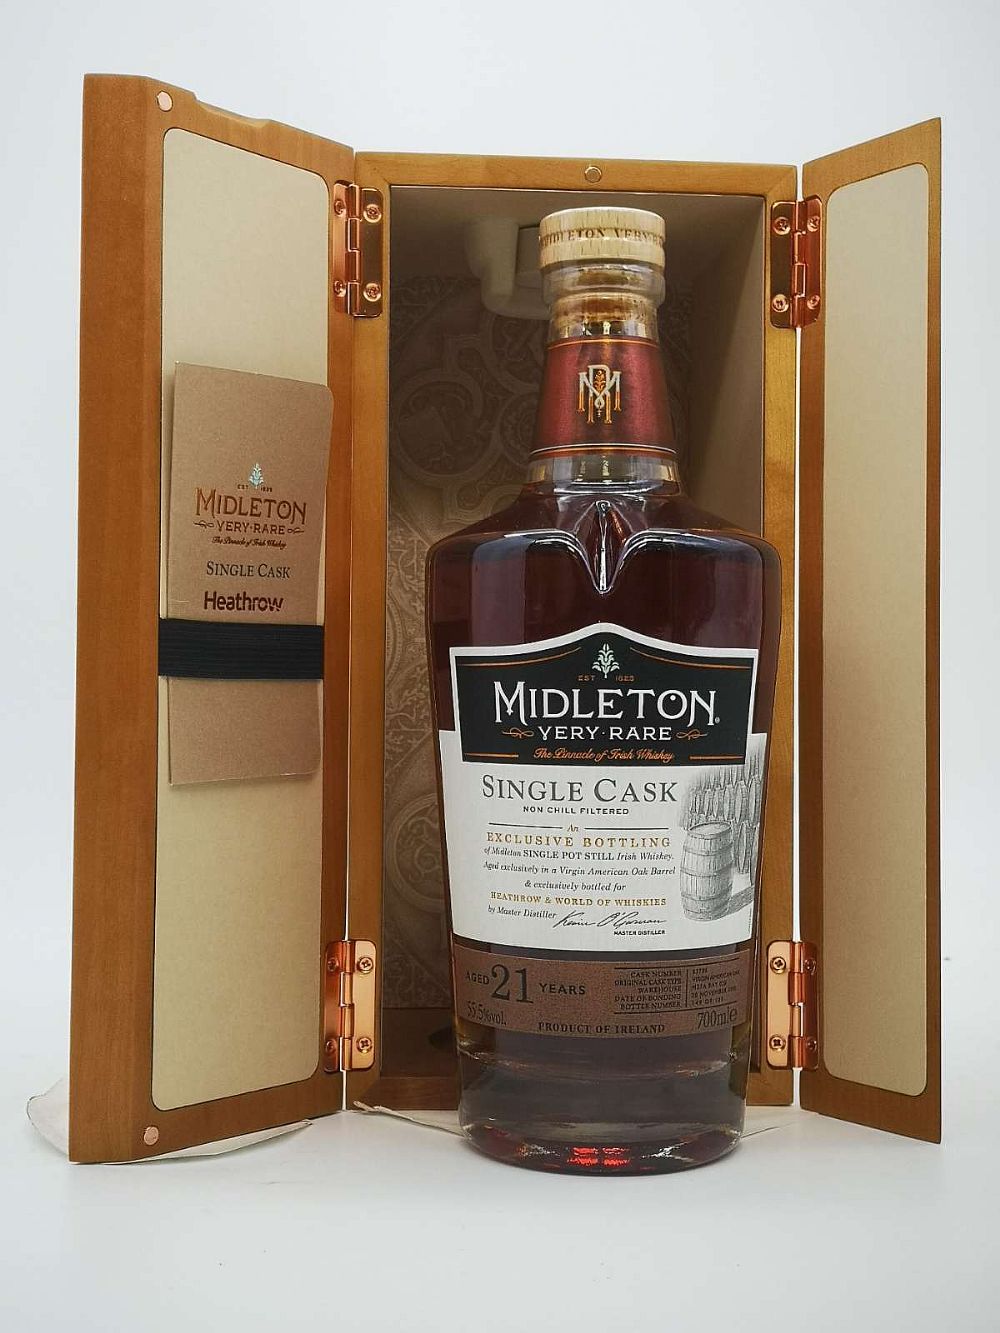 Midleton Very Rare Single Cask, Heathrow & World of Whiskies Exclusive, 21 year old